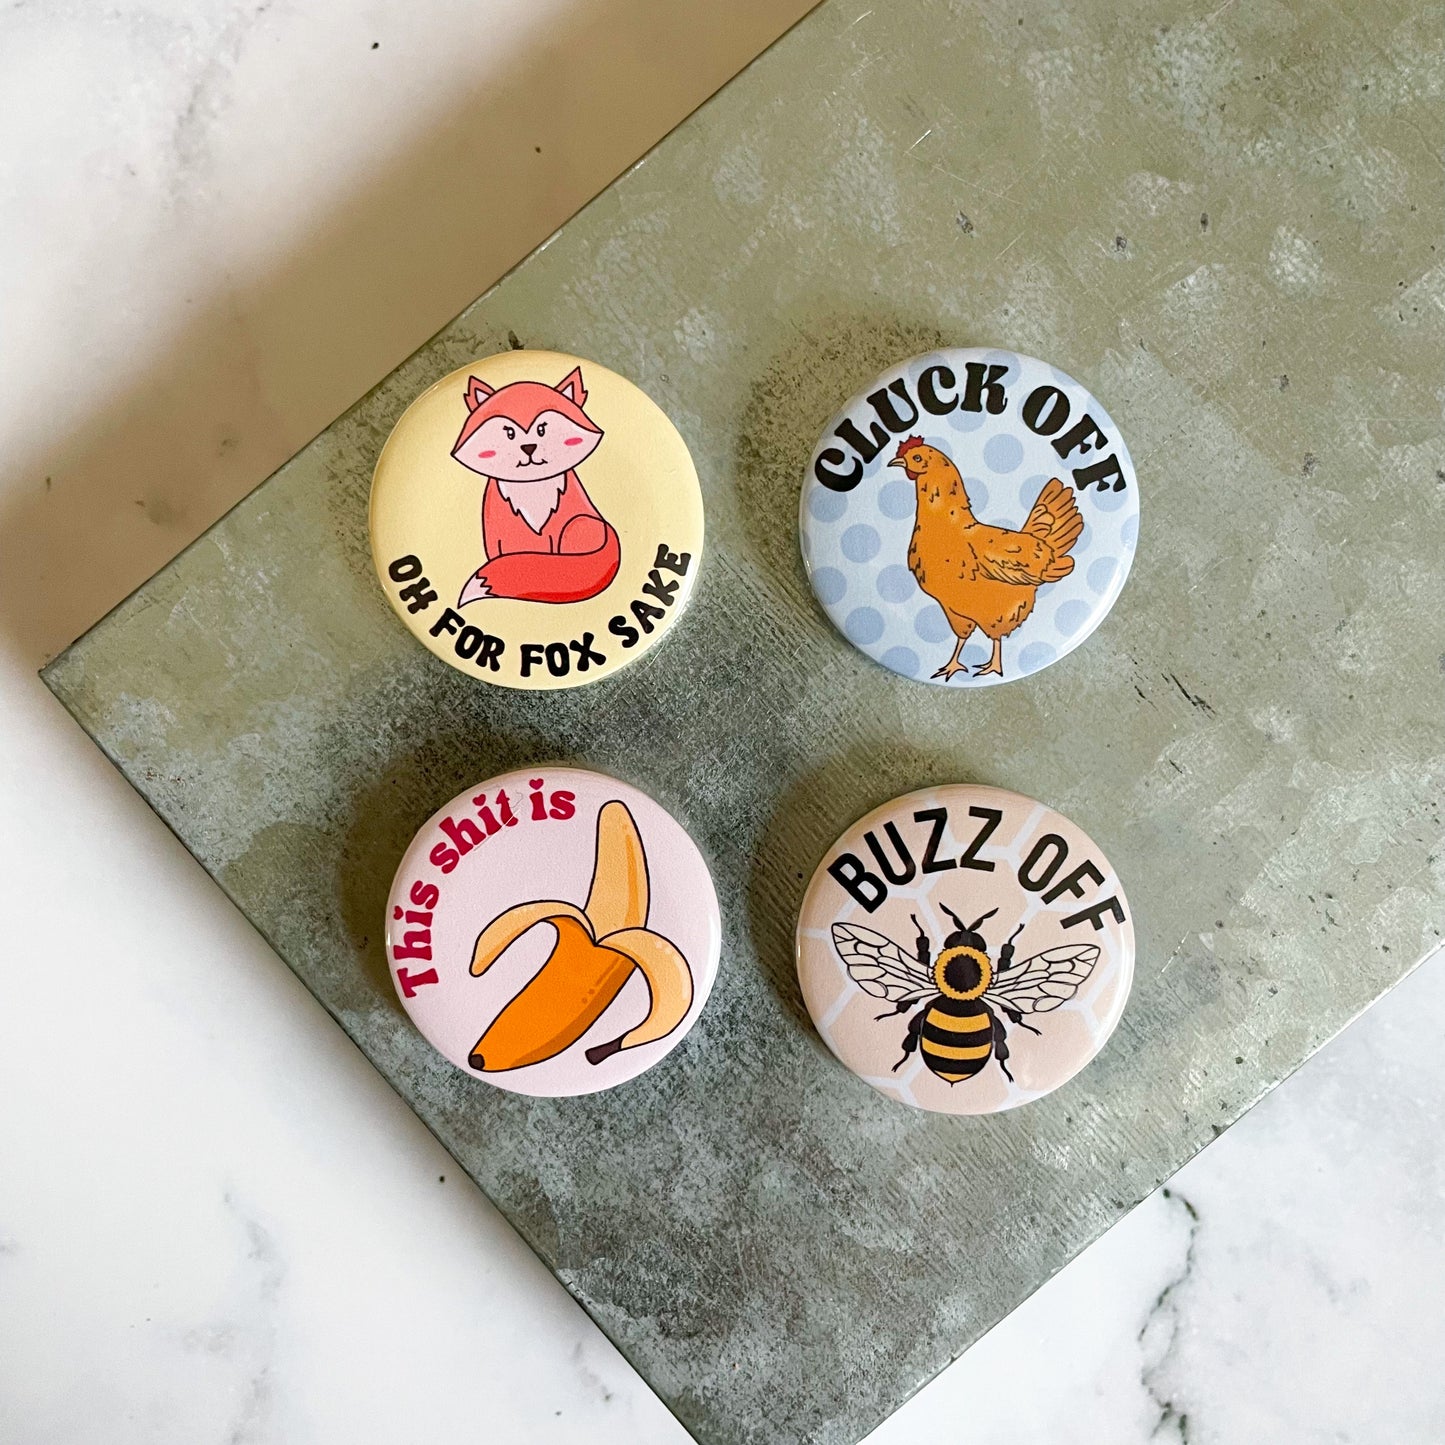 Cluck Off Chicken Button / Badge (Buy 4 Get 1 FREE)